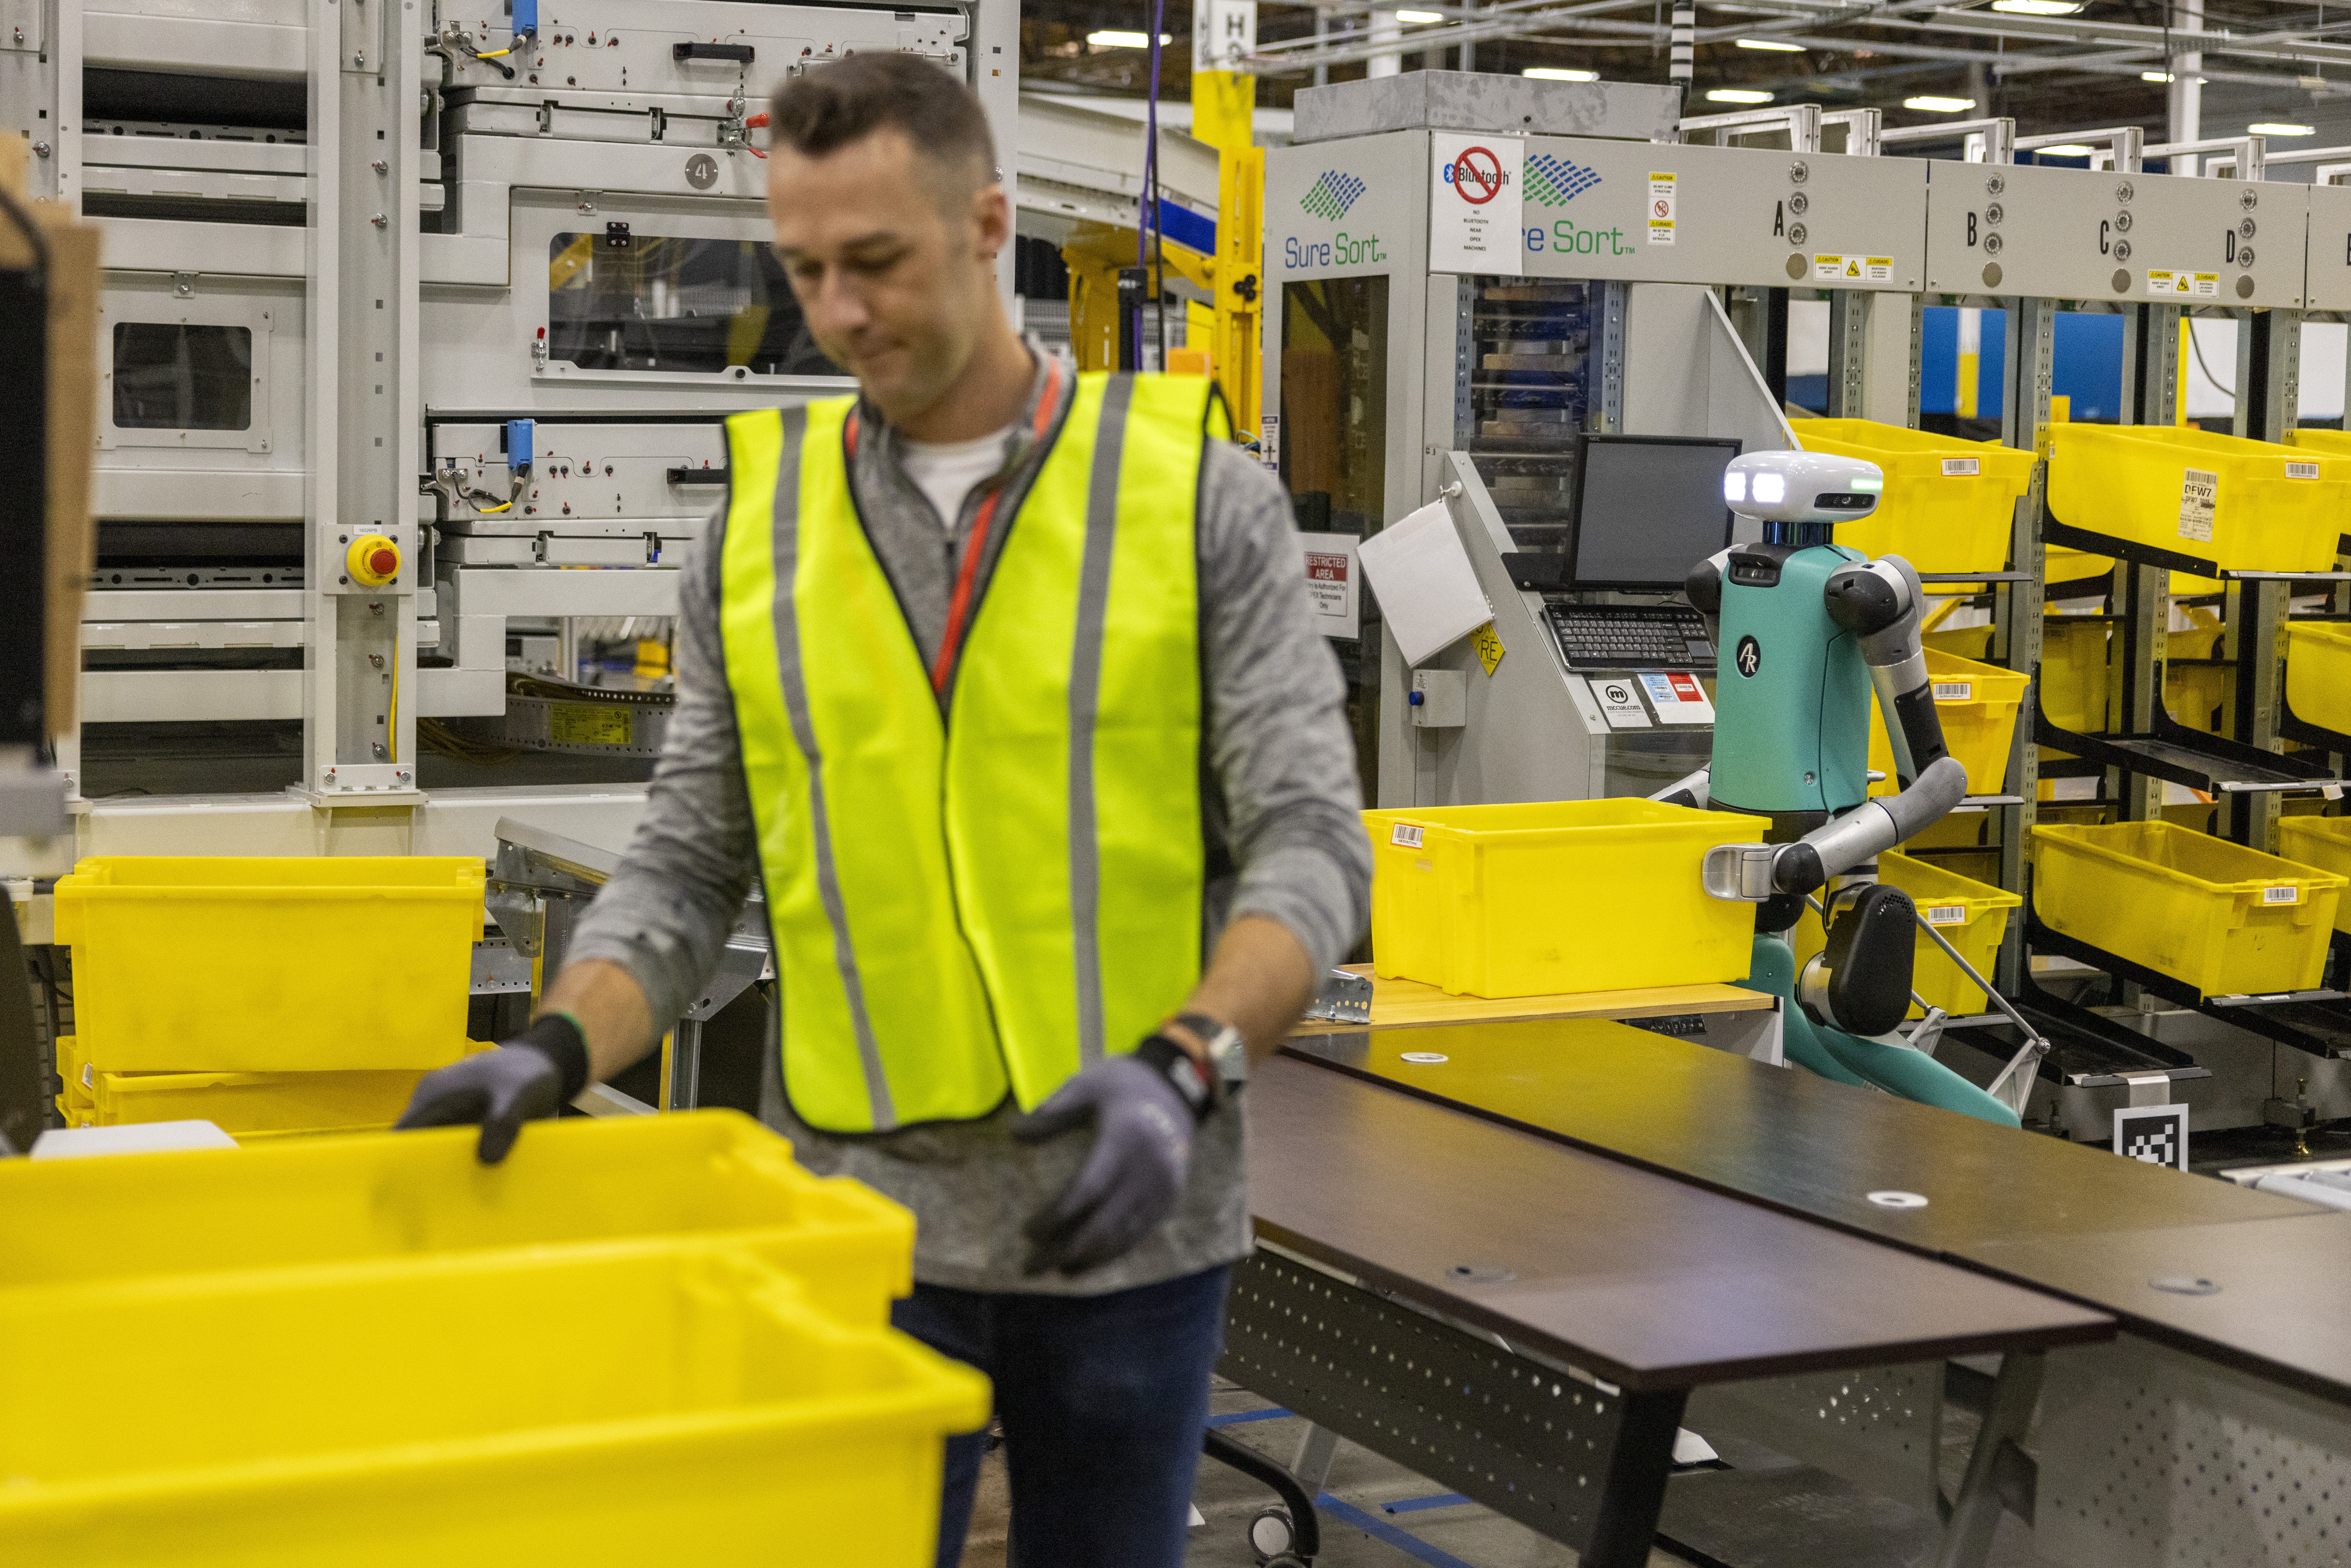 Amazon trials humanoid robots to see if they can help staff warehouses |  The Independent